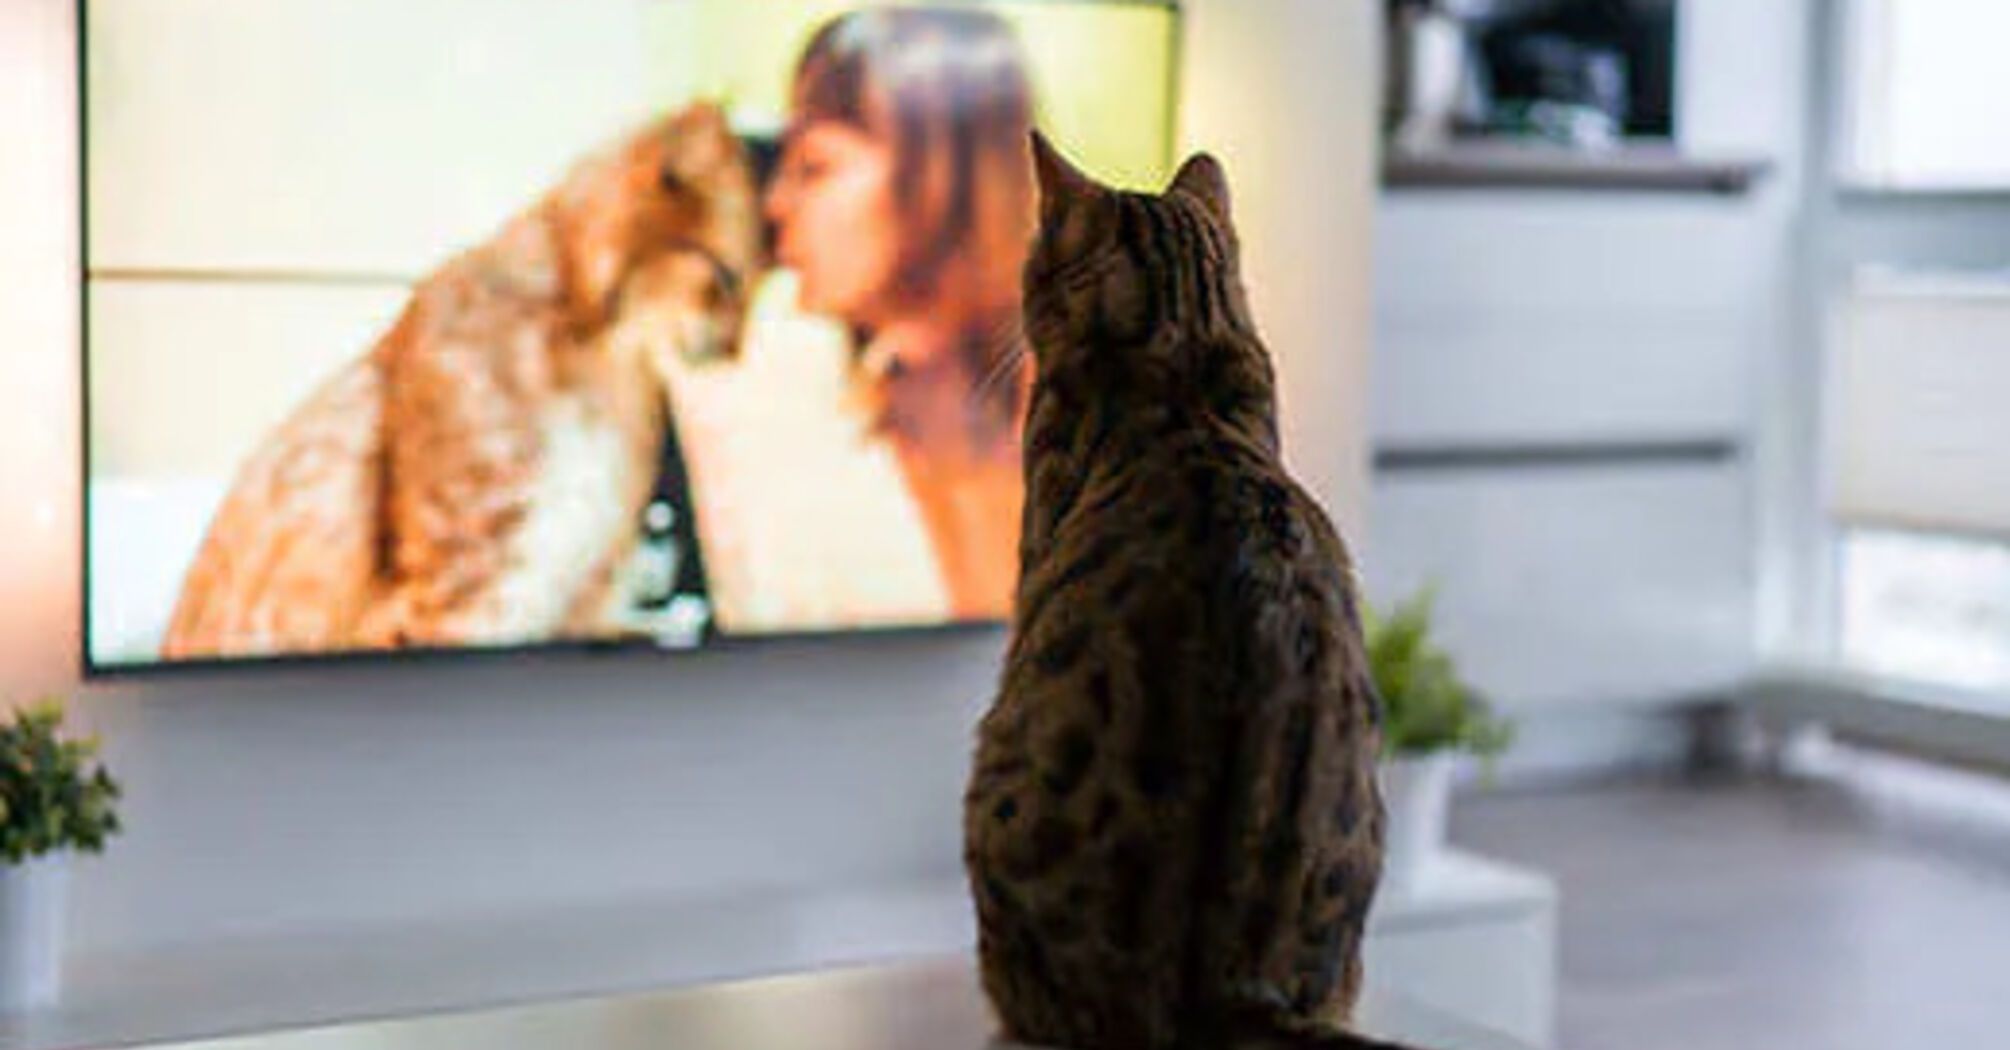 What cats and dogs see when they watch TV